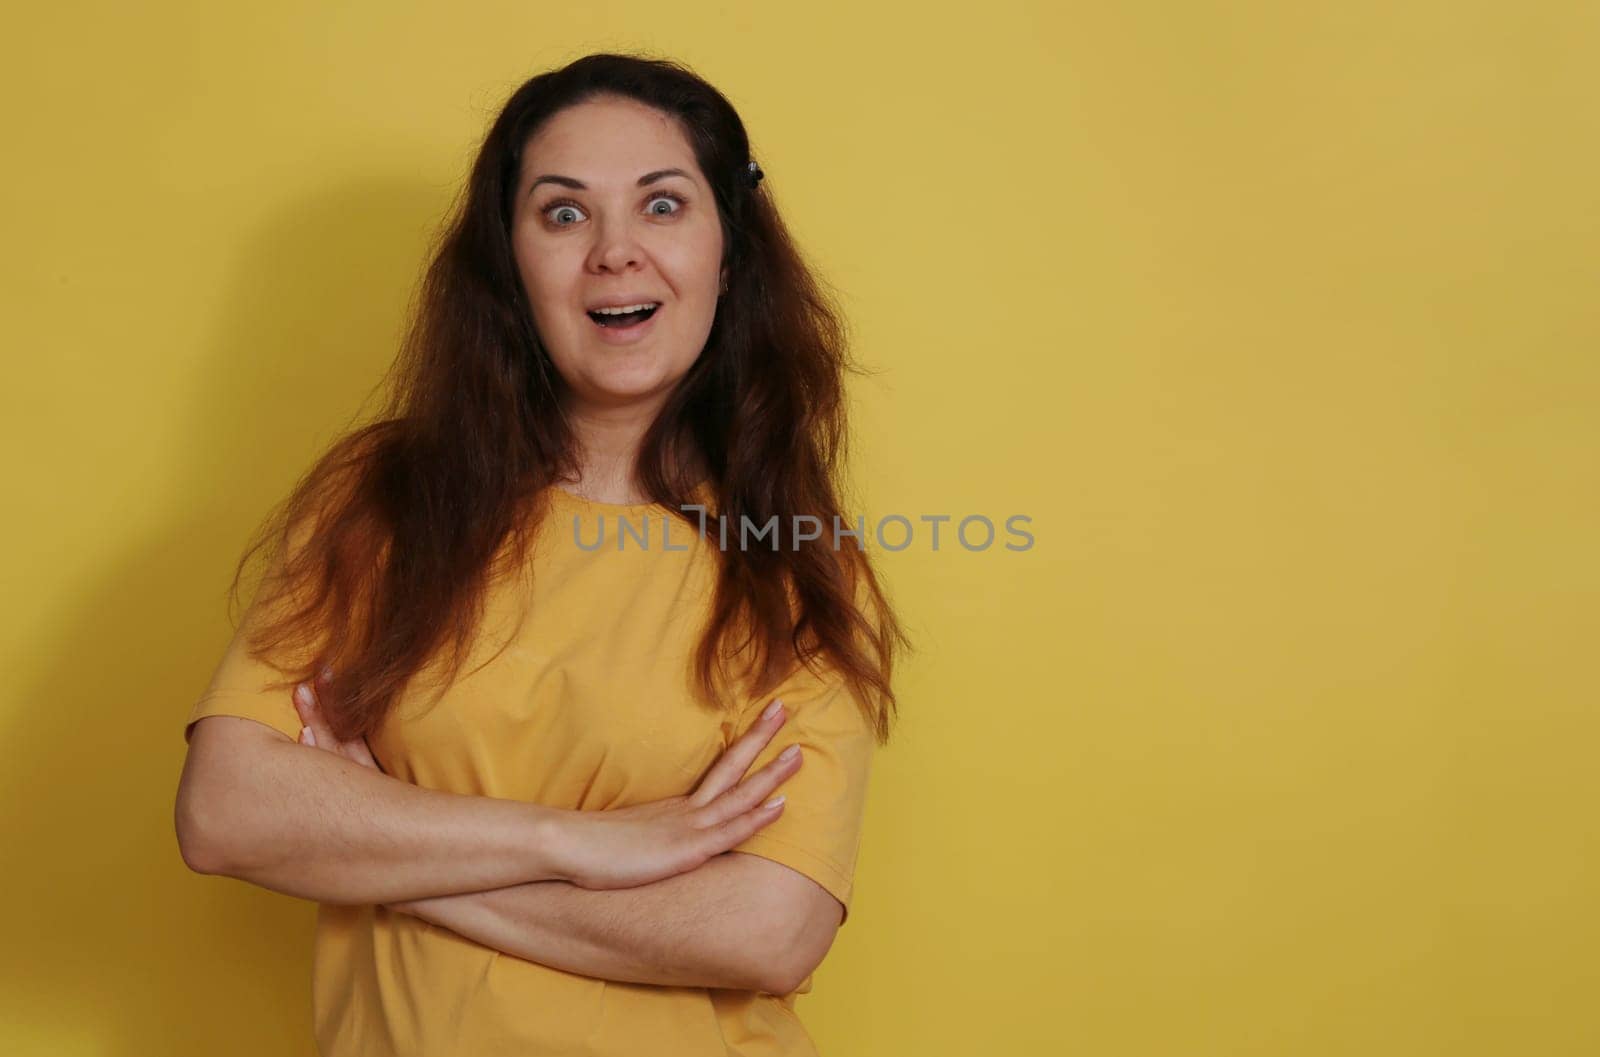 Joyful and surprised woman in a yellow tank top with long dark hair. by gelog67